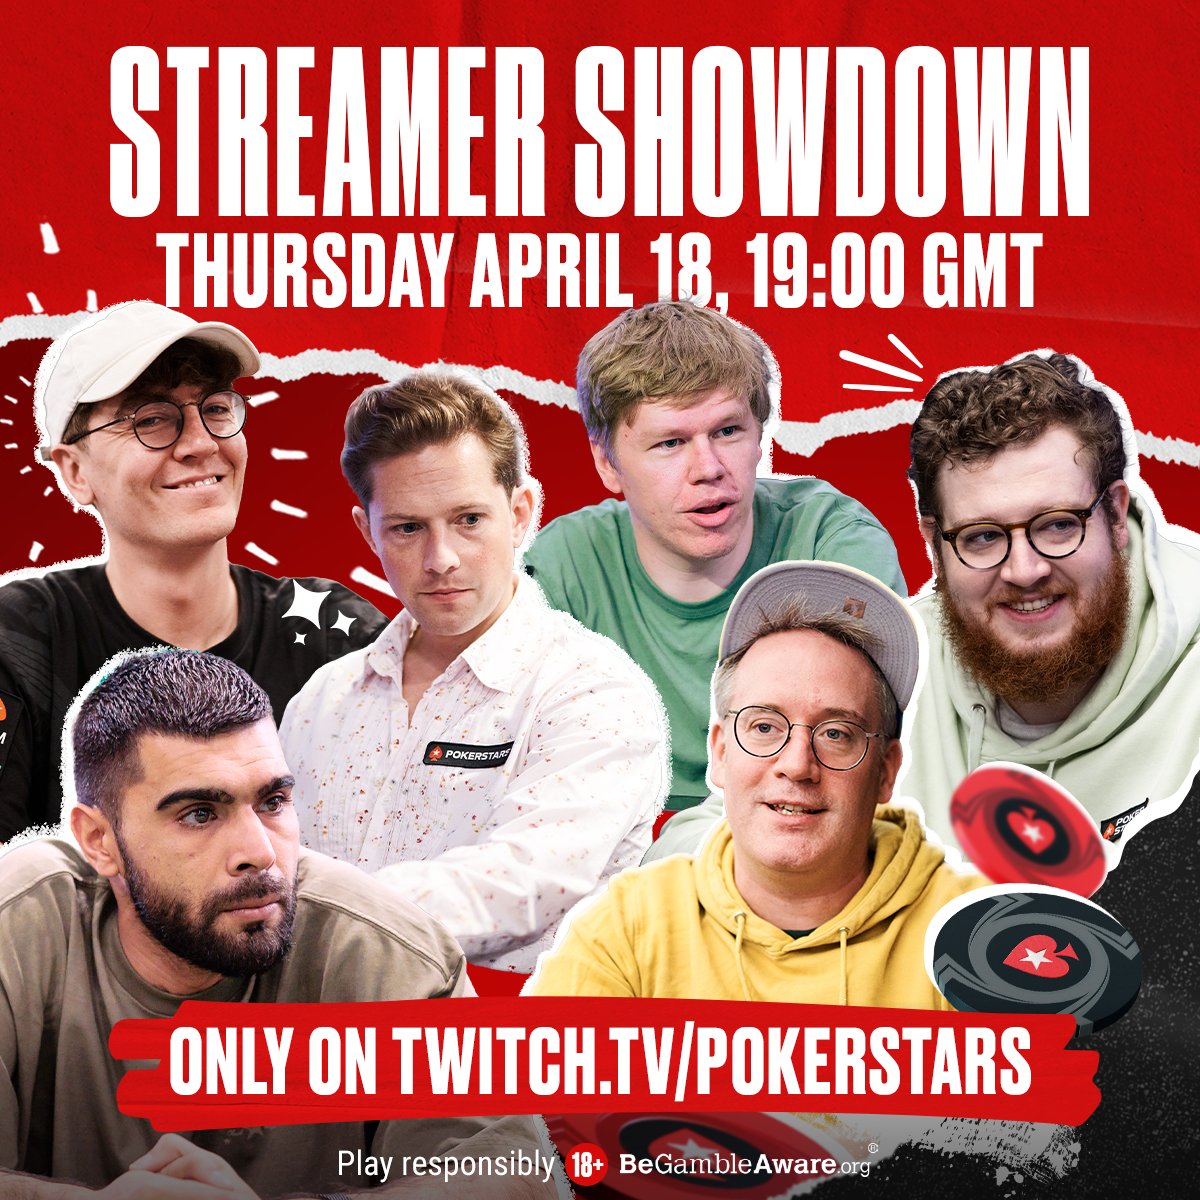 📅 Tomorrow on @PSTwitch - it's The Streamer Showdown! Join @EasyWithAces, @spraggy, @Tonkaaap, @SquidPoker, @AdamMcKola and @Chelsearory as they battle it out in a $50 SnG. PLUS ▶️ Tune in at 19:00 BST to find out how you can play along in a $3k GTD centroll 👀